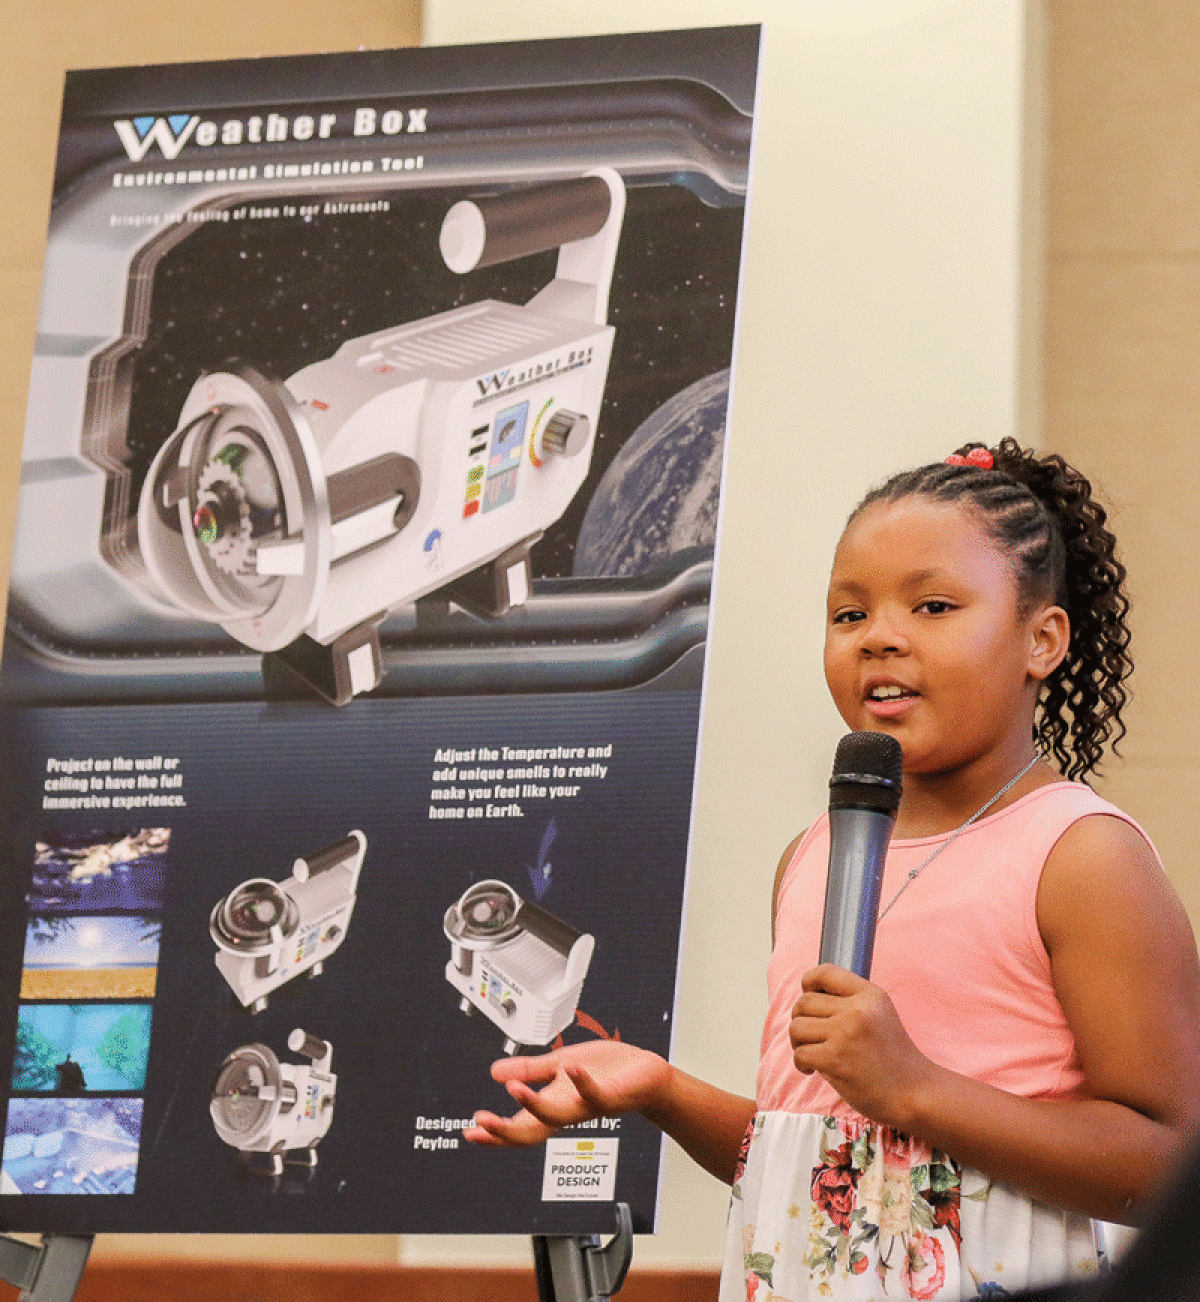  Briarwood Elementary School fourth grade student Peyton Chatman designed a “weather box” astronauts can use while orbiting the earth. 